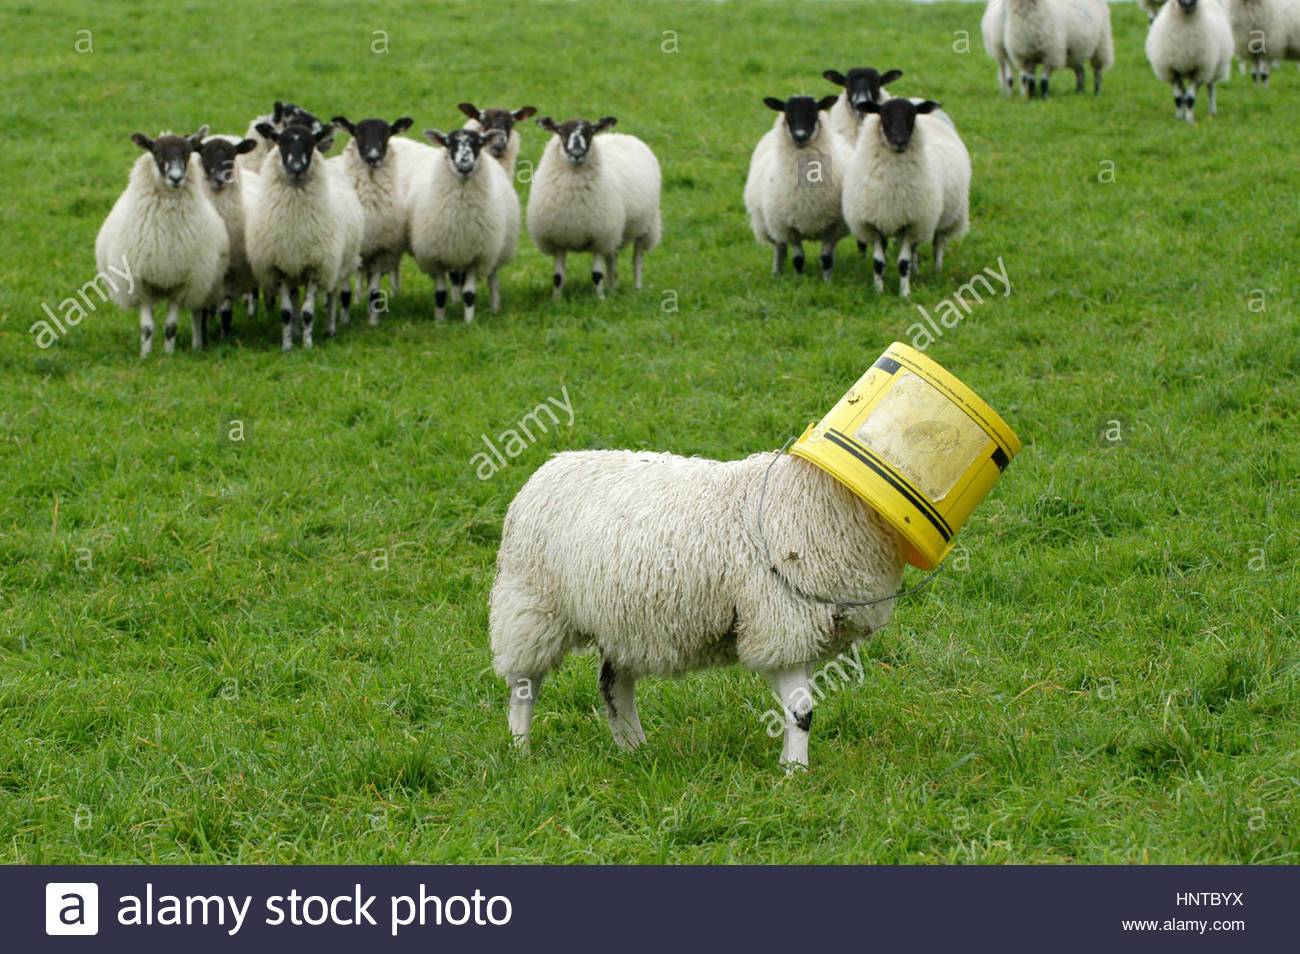 lamb-with-bucket-on-its-head-whilst-other-sheep-watch-on-HNTBYX.jpg